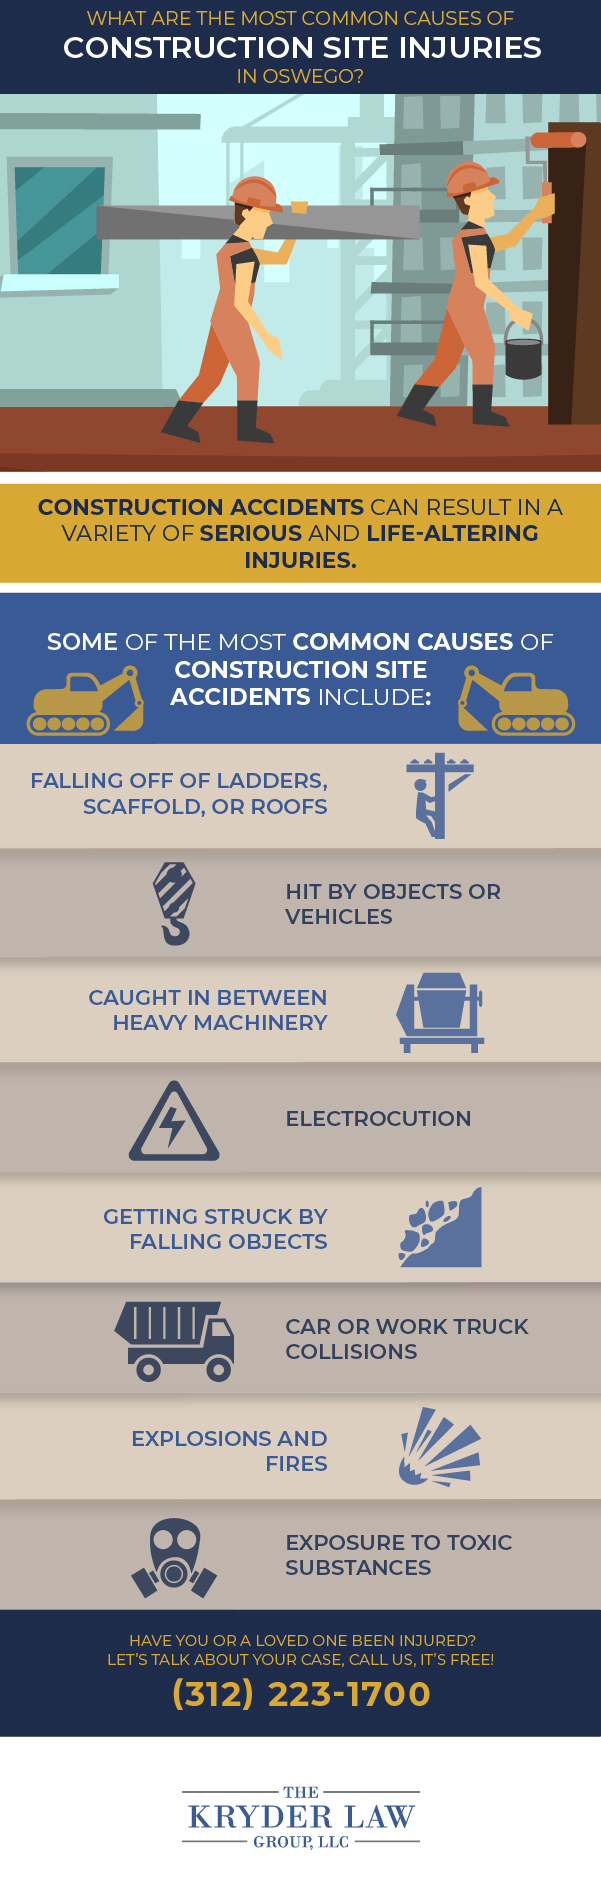 The Benefits of Hiring an Oswego Construction Accident Lawyer Infographic